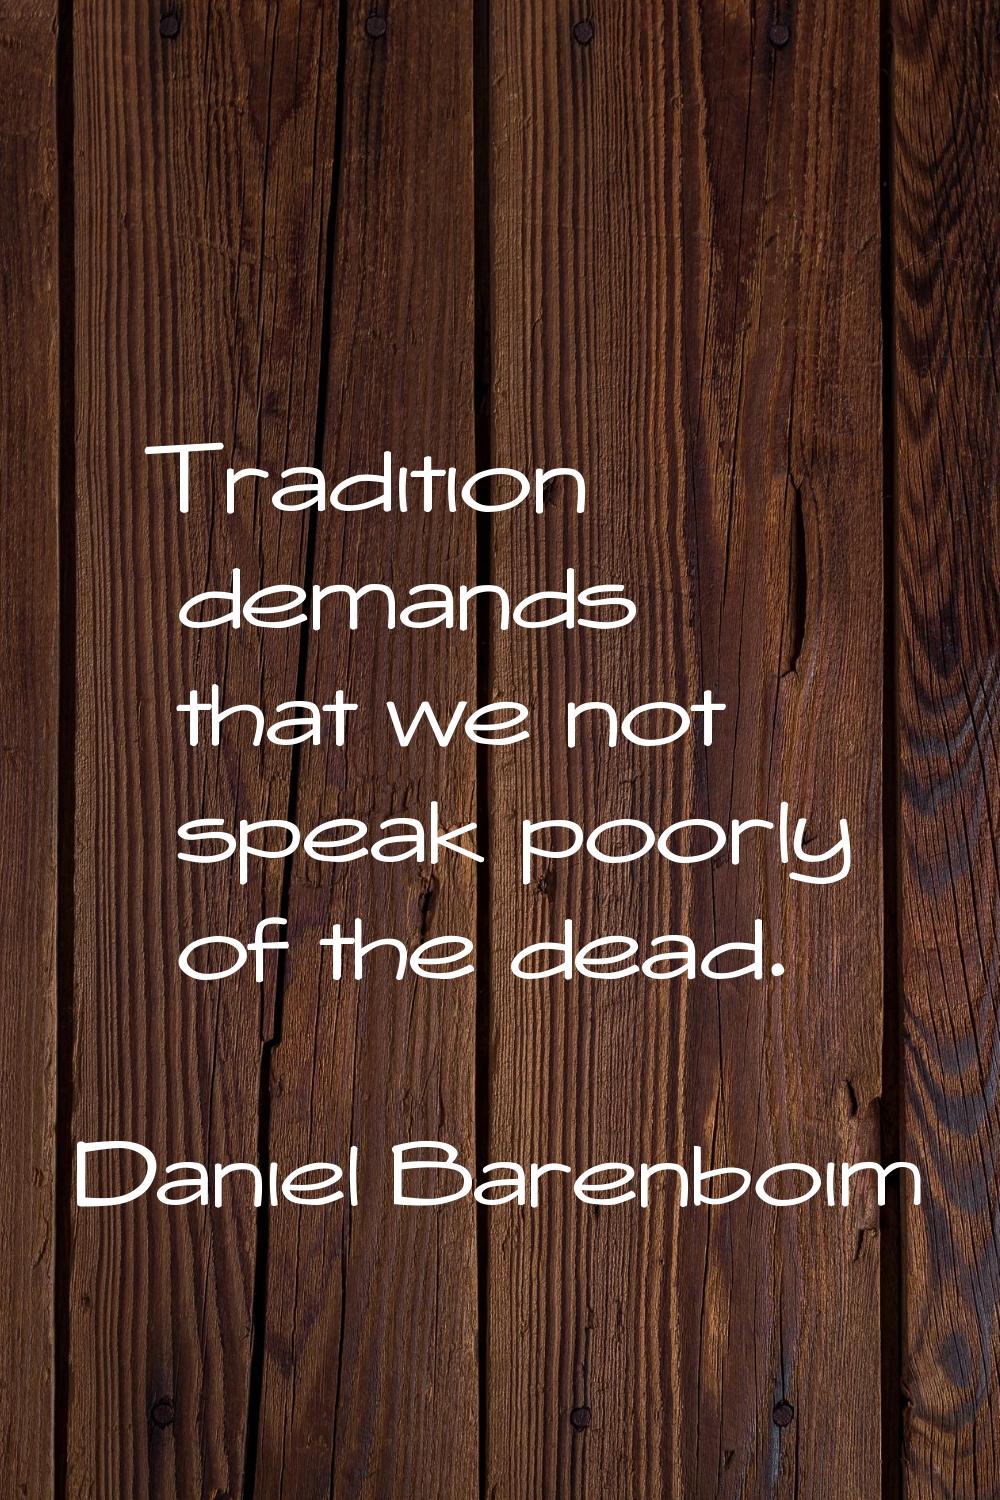 Tradition demands that we not speak poorly of the dead.